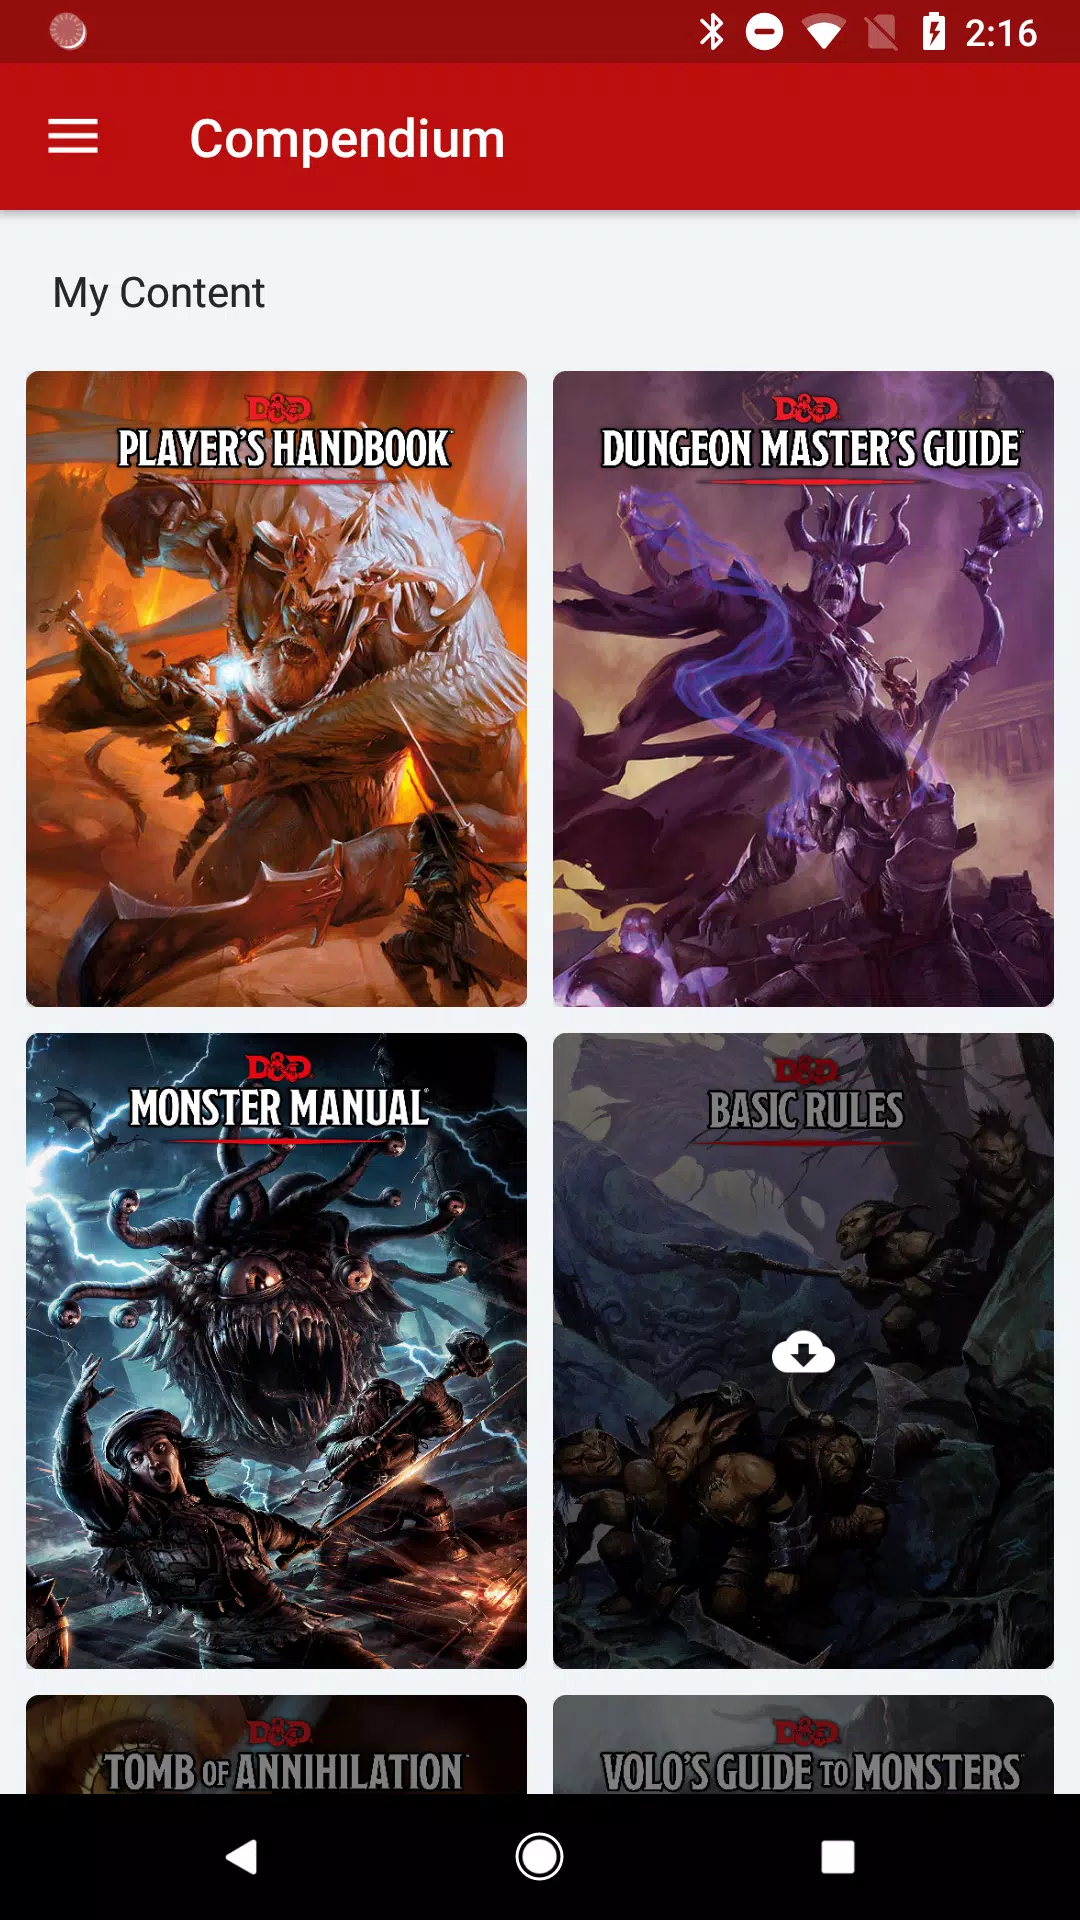 Basic Rules for Dungeons and Dragons (D&D) Fifth Edition (5e) - D&D Beyond